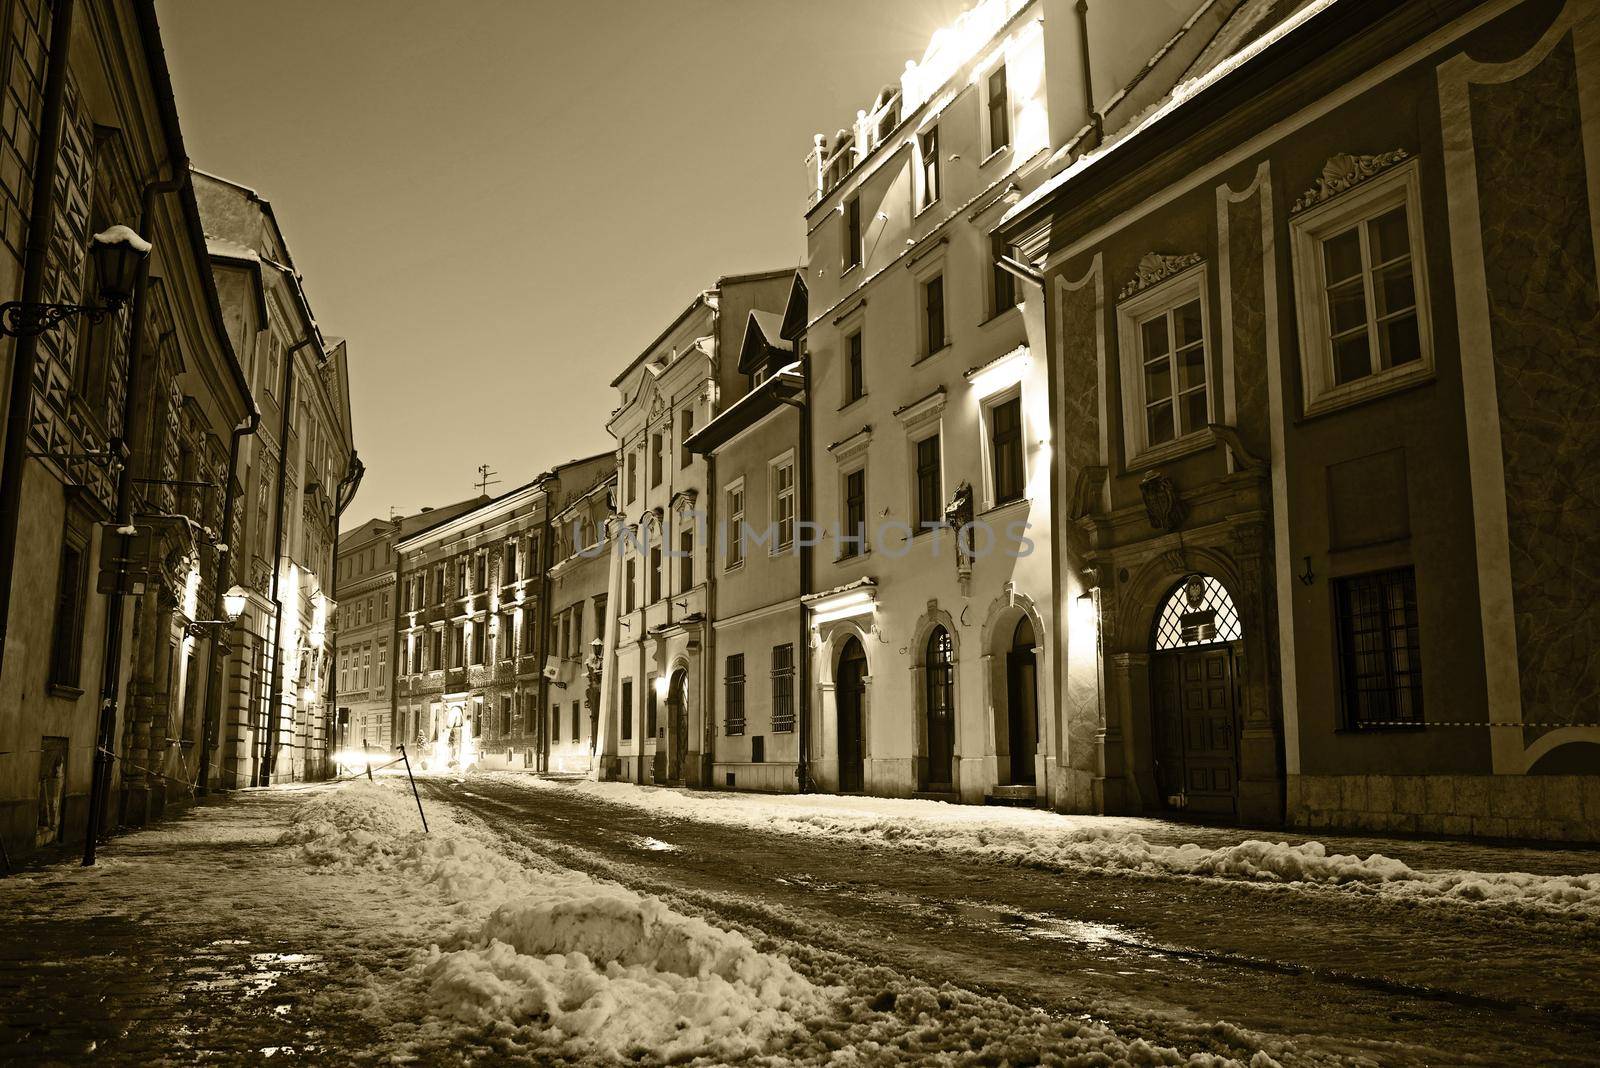 Krakow Old Town in Sepia. Old Krakow at Night. Krakow, Poland. Architecture Photography Collection.